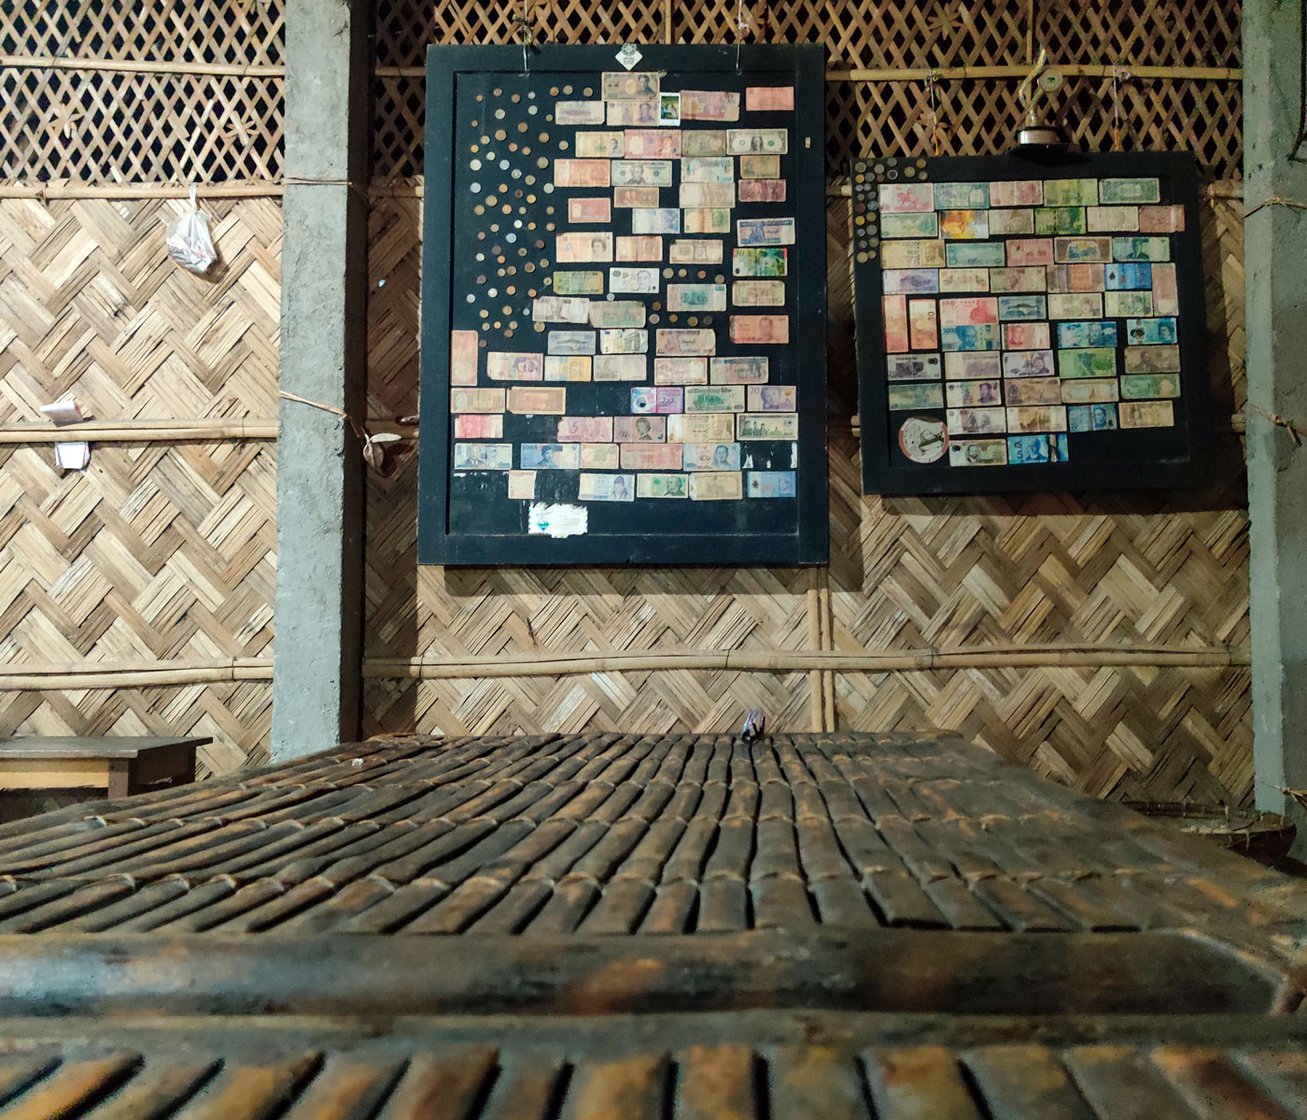 At Risong’s Kitchen, a frame on a bamboo wall holds currencies from across the world.